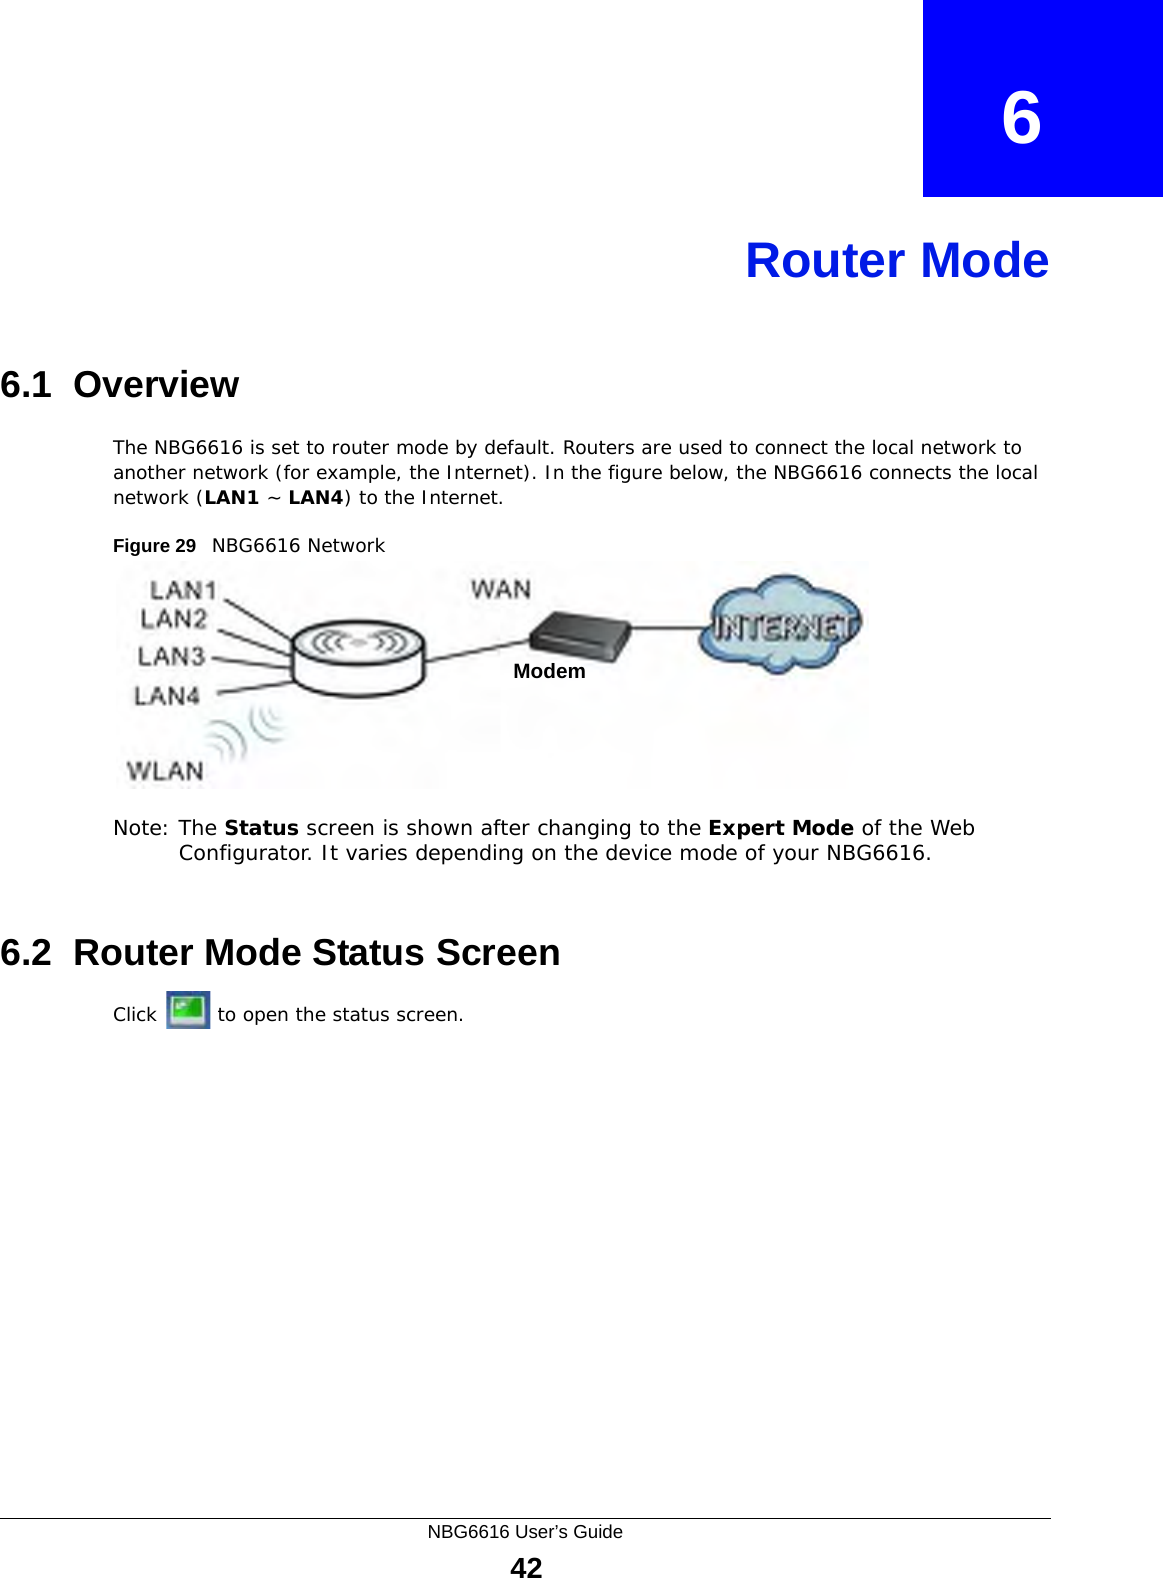 NBG6616 User’s Guide42CHAPTER   6Router Mode6.1  OverviewThe NBG6616 is set to router mode by default. Routers are used to connect the local network to another network (for example, the Internet). In the figure below, the NBG6616 connects the local network (LAN1 ~ LAN4) to the Internet.Figure 29   NBG6616 NetworkNote: The Status screen is shown after changing to the Expert Mode of the Web Configurator. It varies depending on the device mode of your NBG6616.6.2  Router Mode Status ScreenClick   to open the status screen. Modem